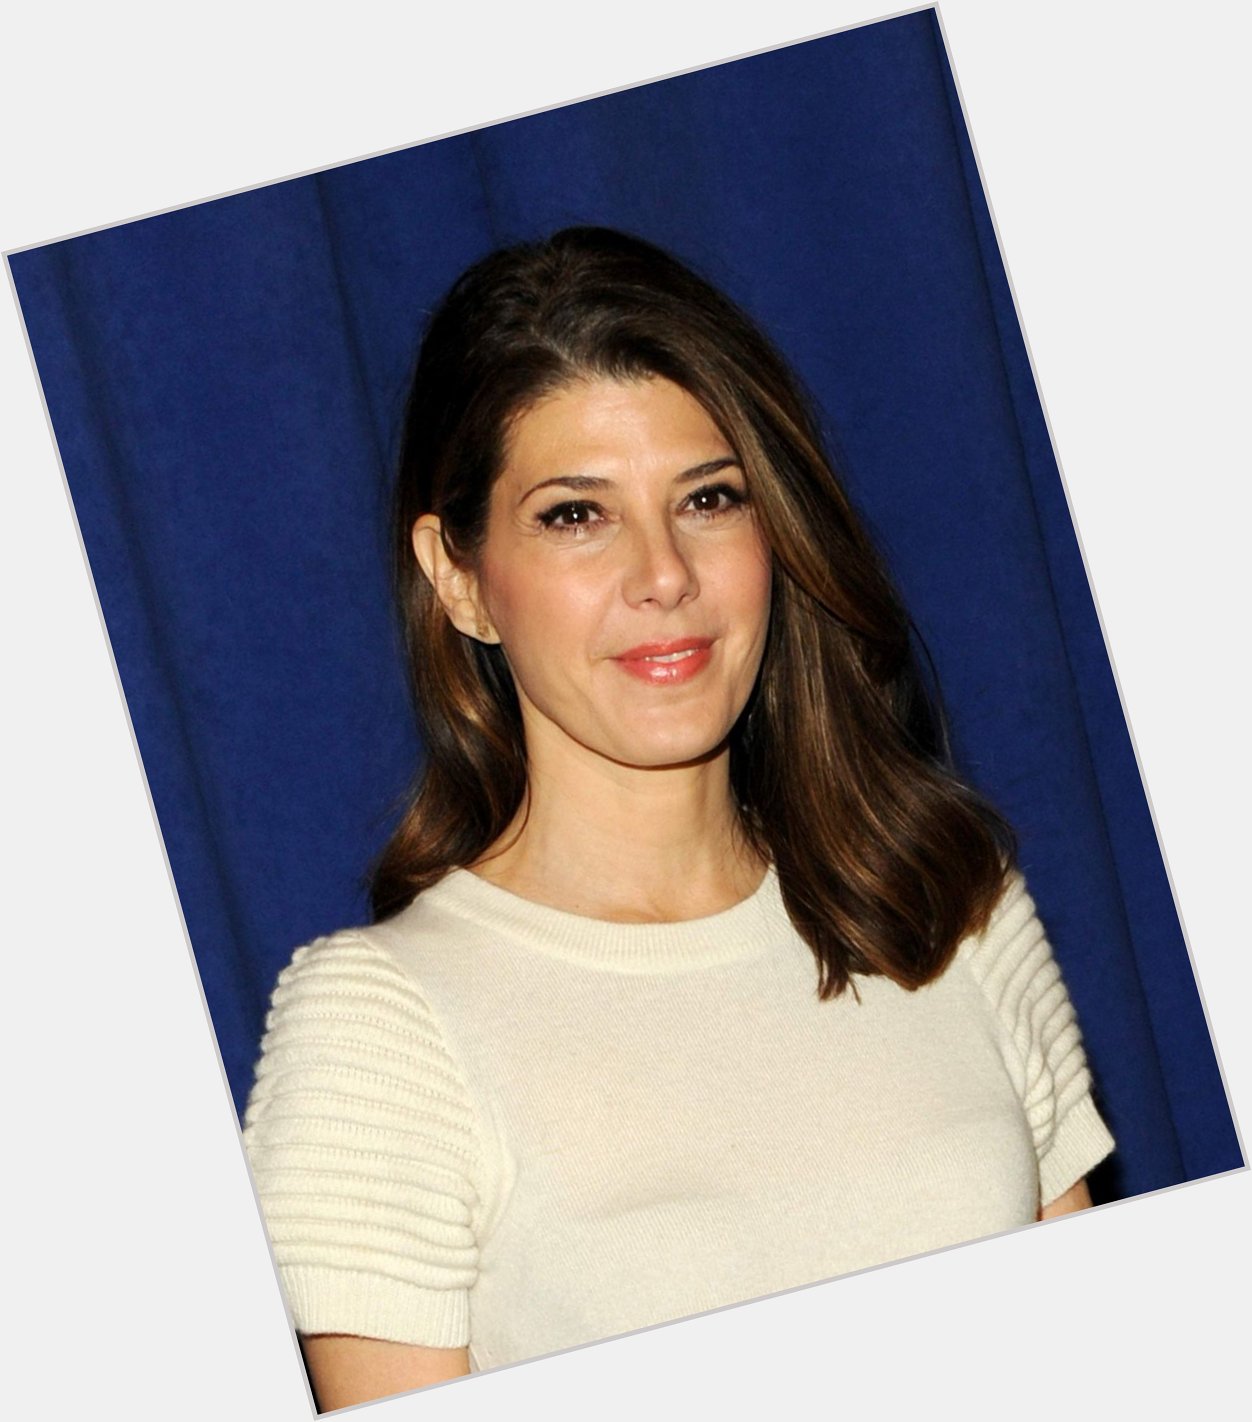 Happy birthday to MenopauseBarbee Marisa Tomei! Welcome to the 50+ club 